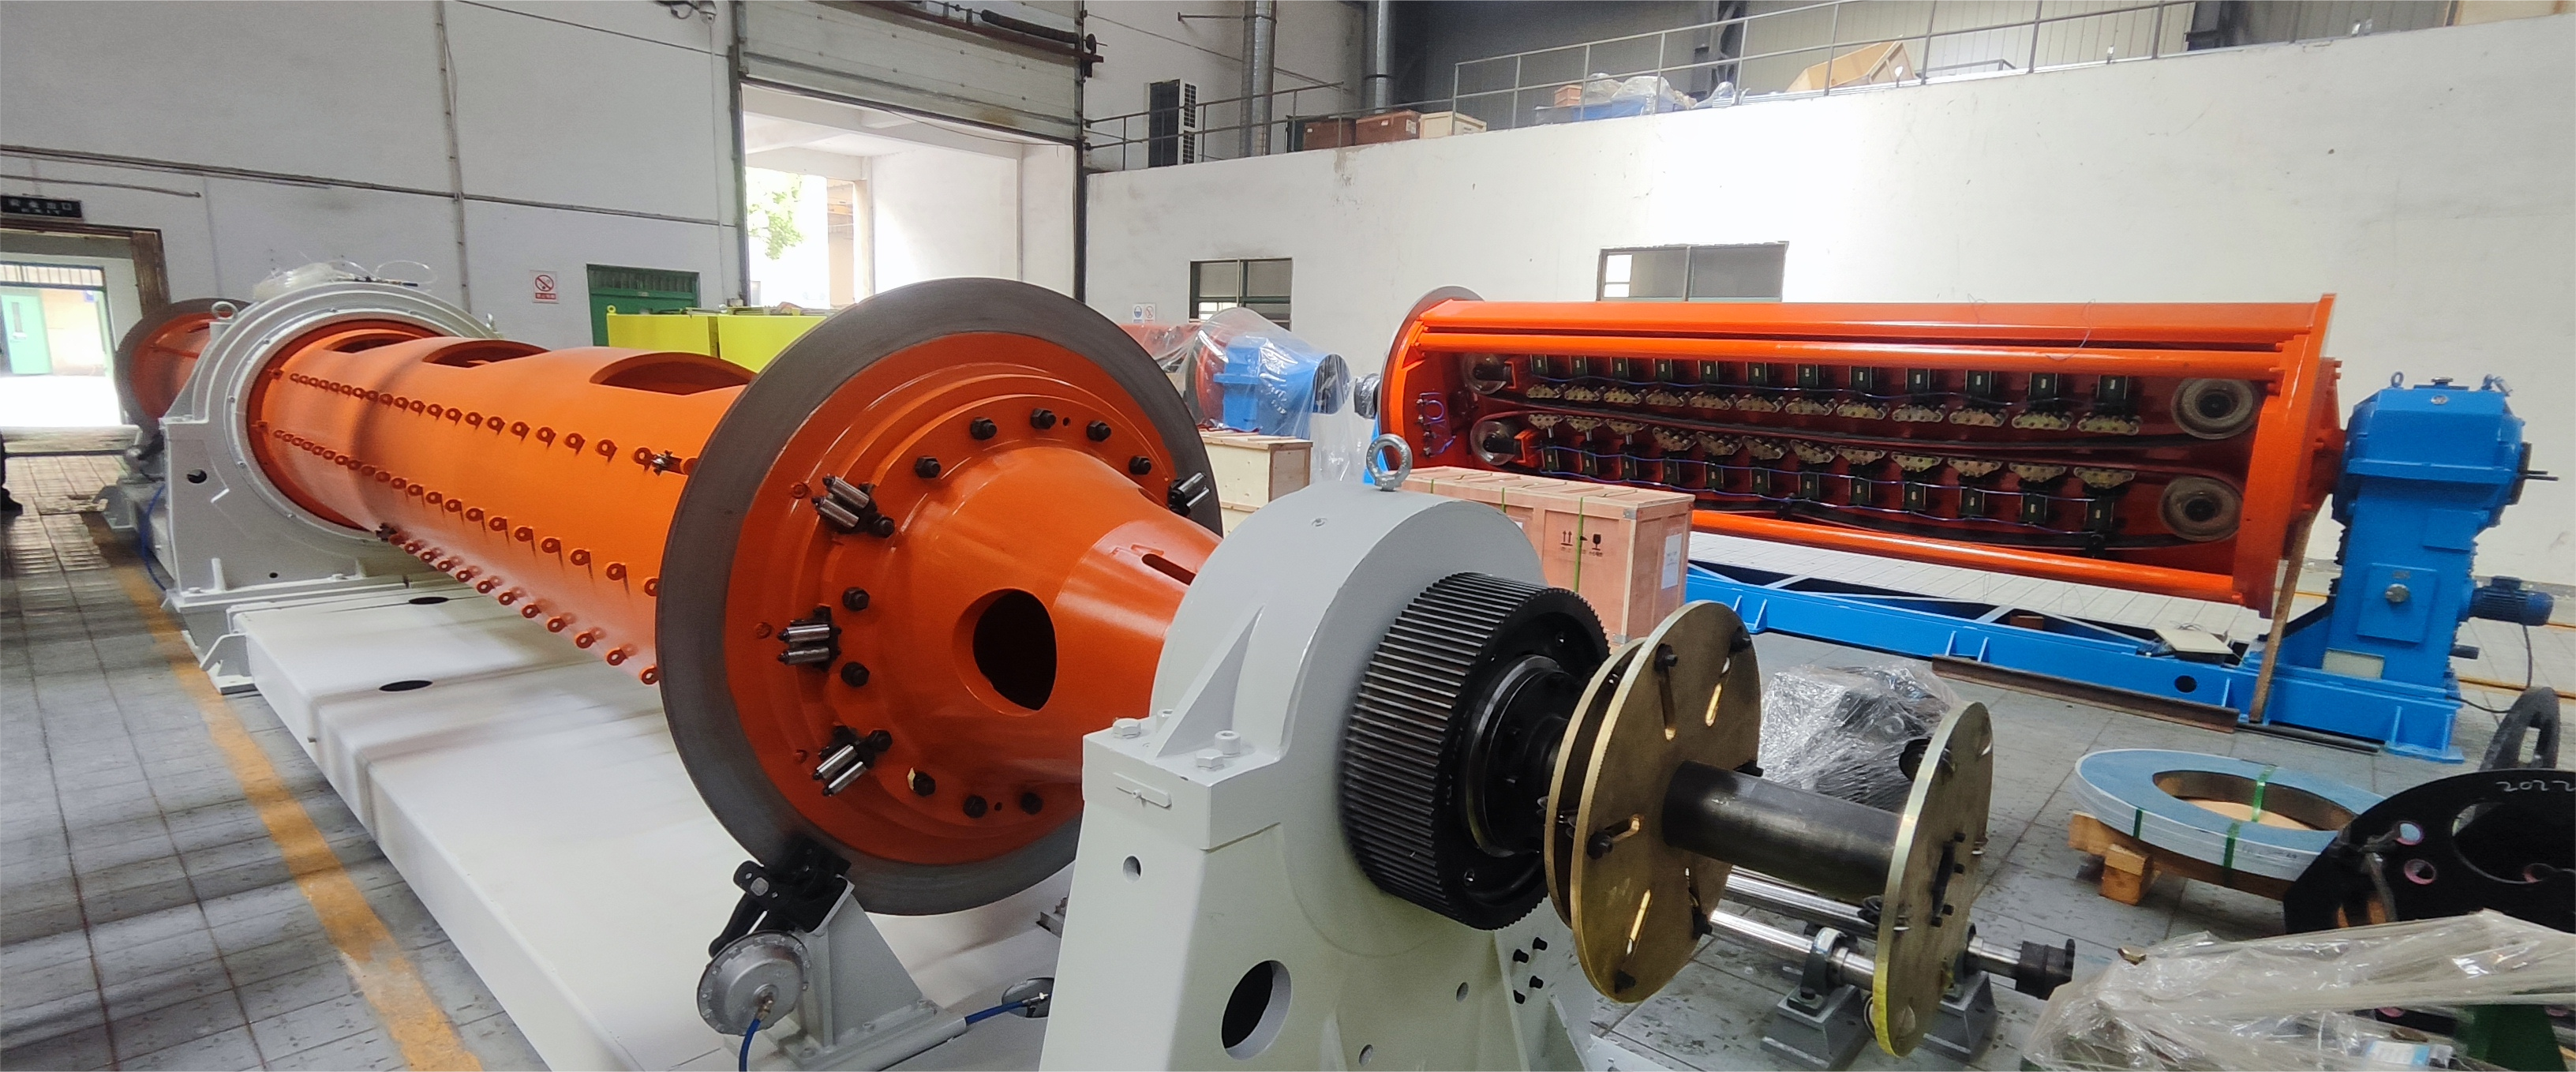 LINT TOP Delivers Advanced Tubular Strander to Norwegian Cable Customer